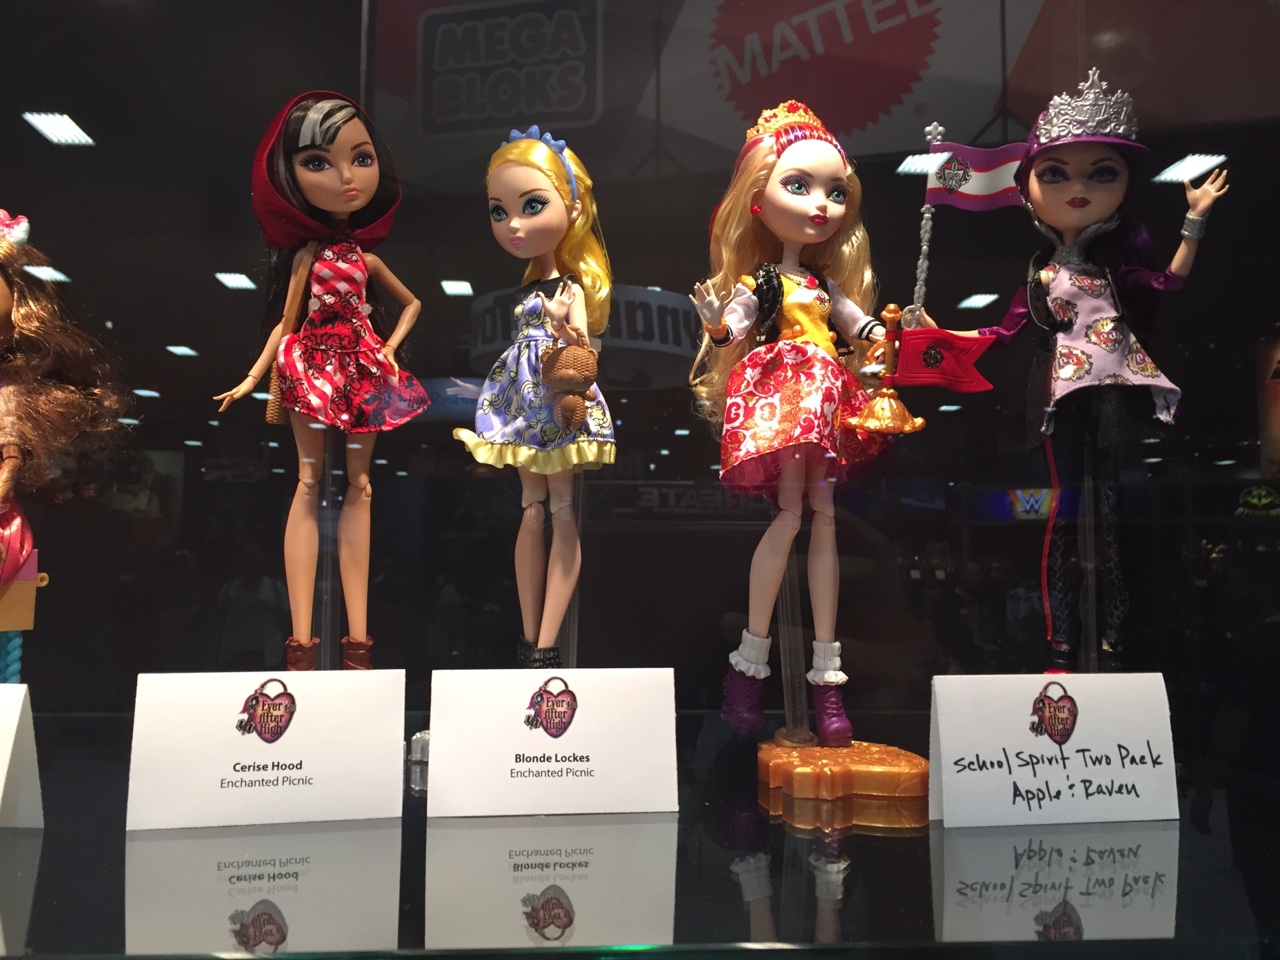 My toys,loves and fashions: Ever After High - SDCC Raven Queen The